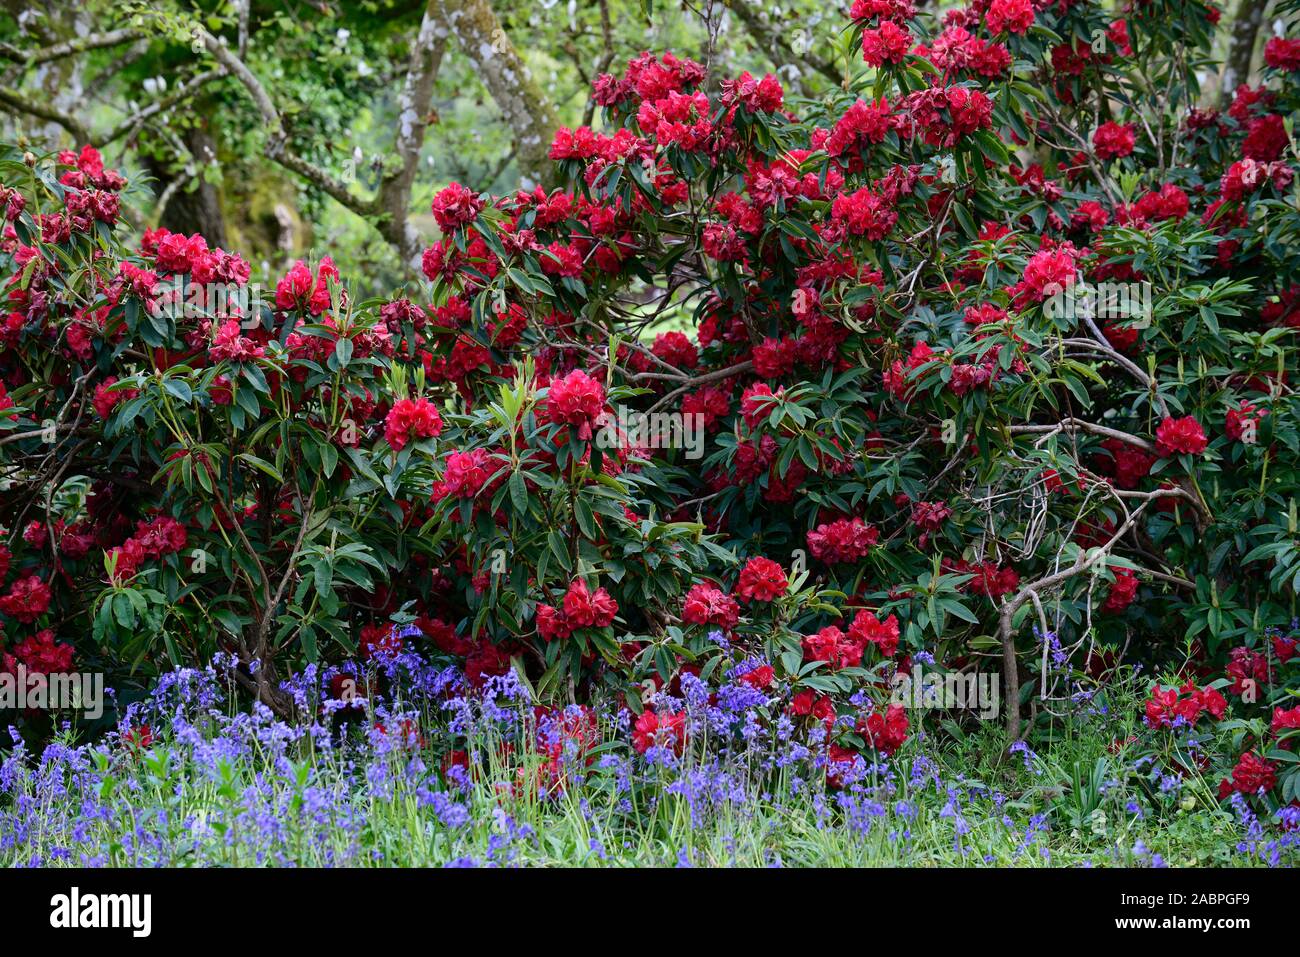 Rhododendron Queen Of Hearts,crimson red flowers,flower,flowering,tree,trees,garden,bluebells,blue flowers,mix,mixed,planting scheme, wood,woodland ga Stock Photo